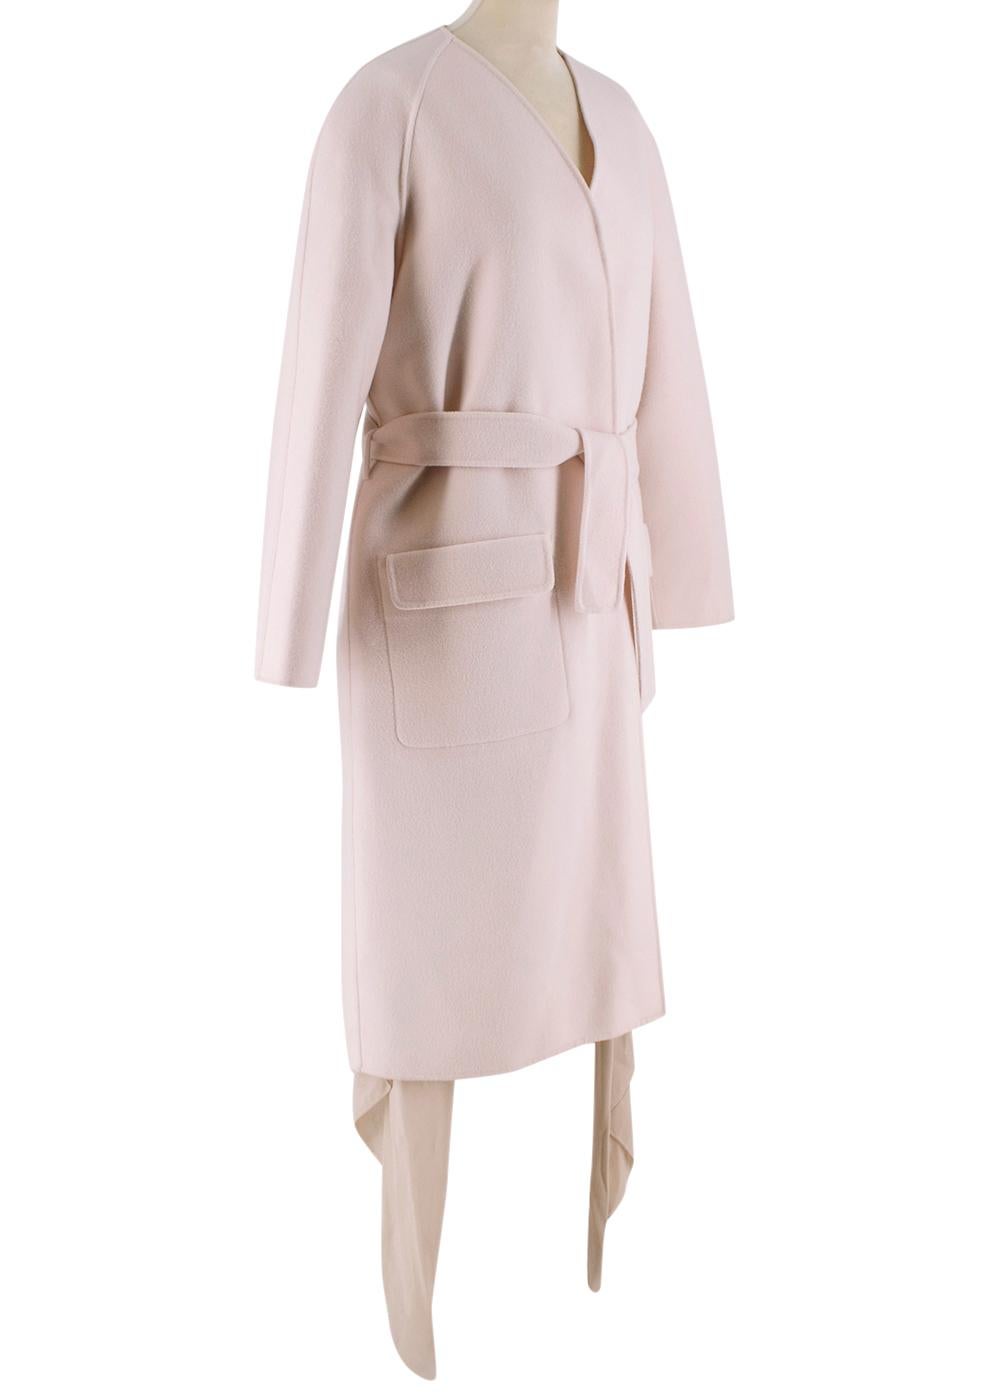 Bottega Veneta Blush Pink Cashmere Tie Waist Coat 

- Luxurious soft pure felted cashmere 
- Longline coat 
- Detachable chiffon scarf
- Tie waist belt for a more cinched-in look 

Materials: 
Coat - 100% Cashmere 
Scarf - 100% Viscose 

Dry Clean